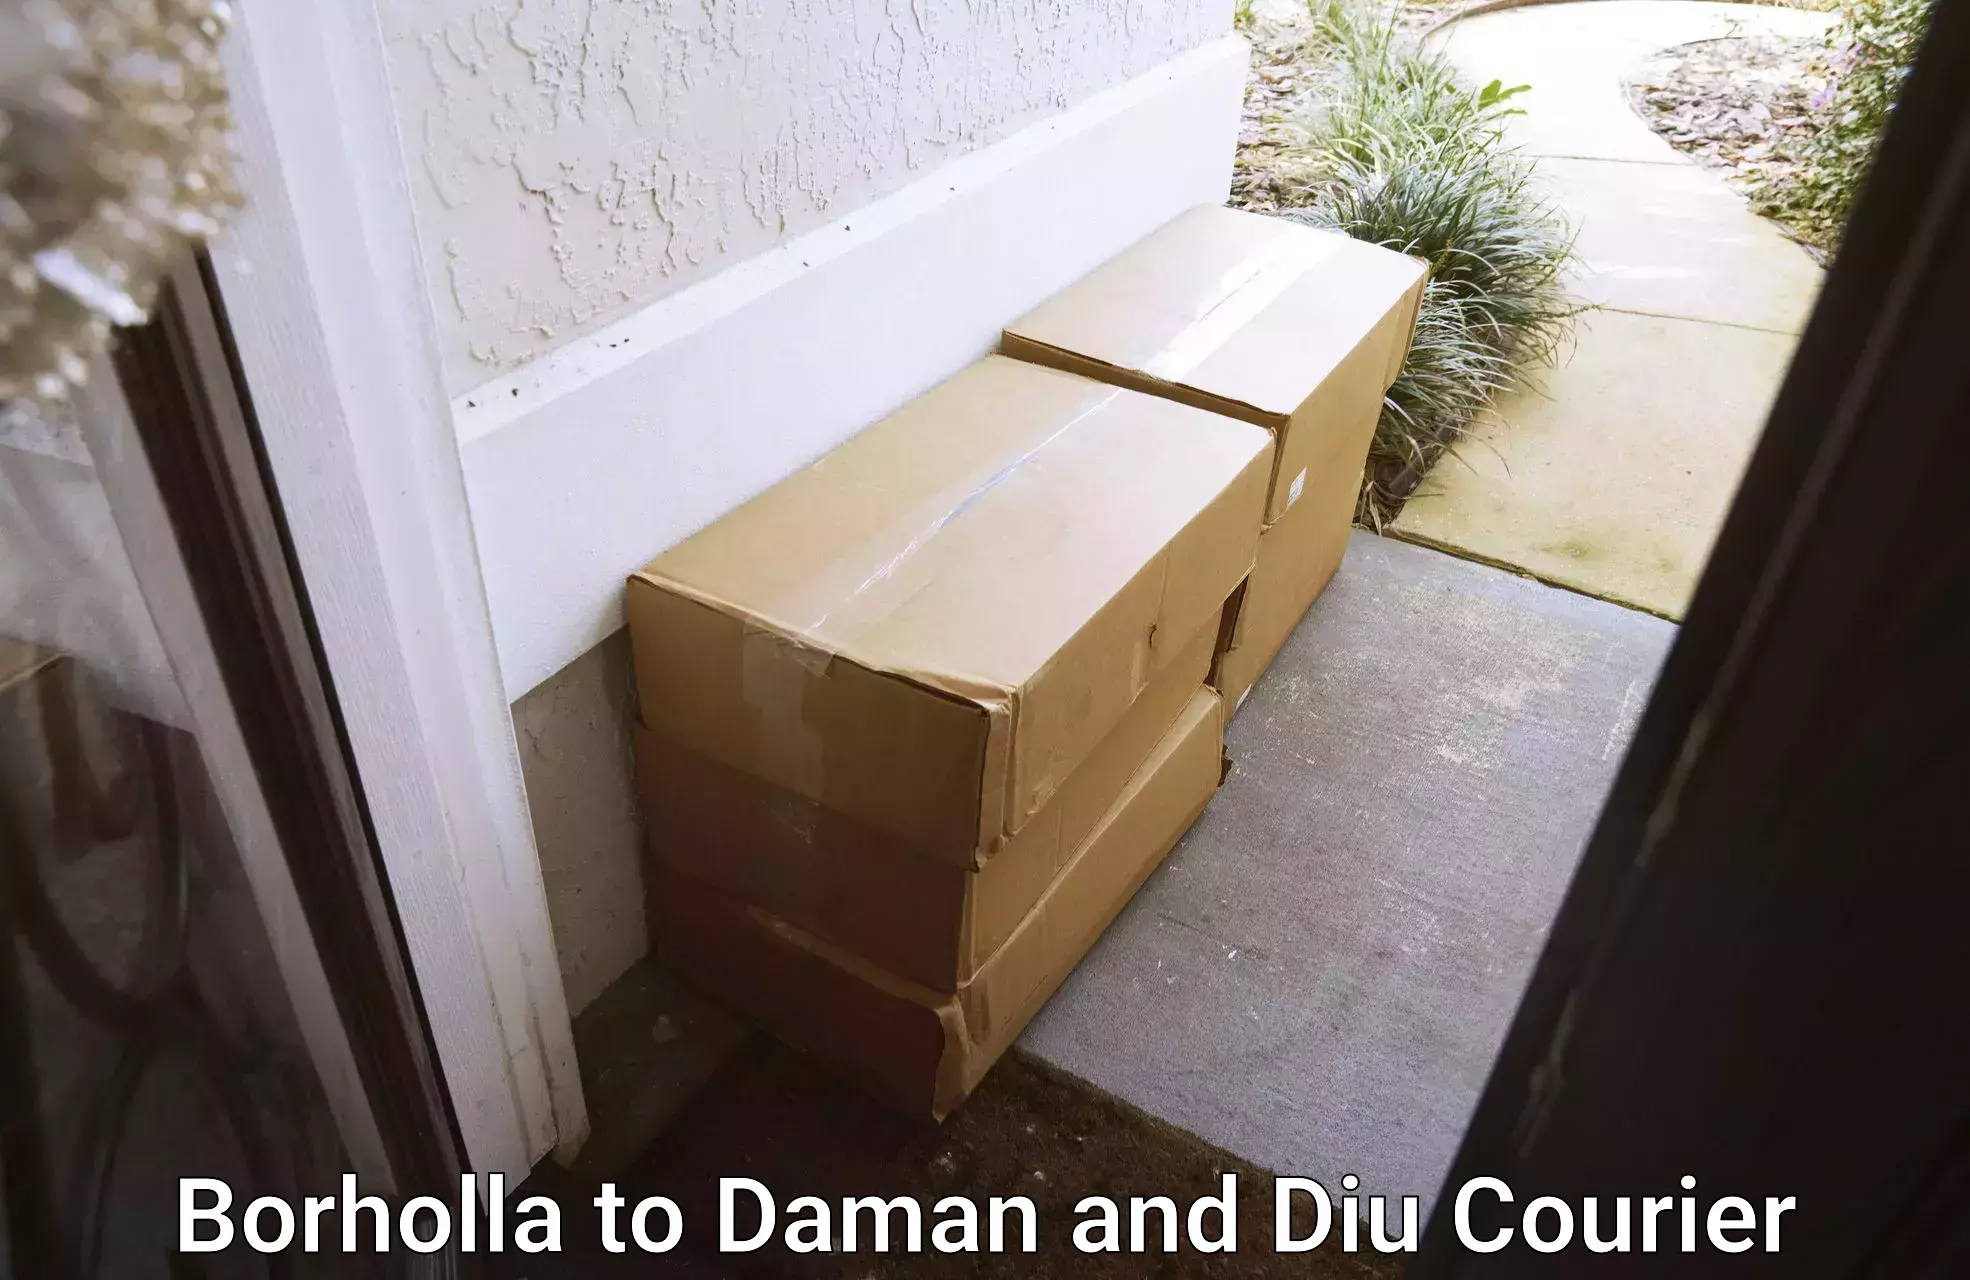 Global courier networks Borholla to Daman